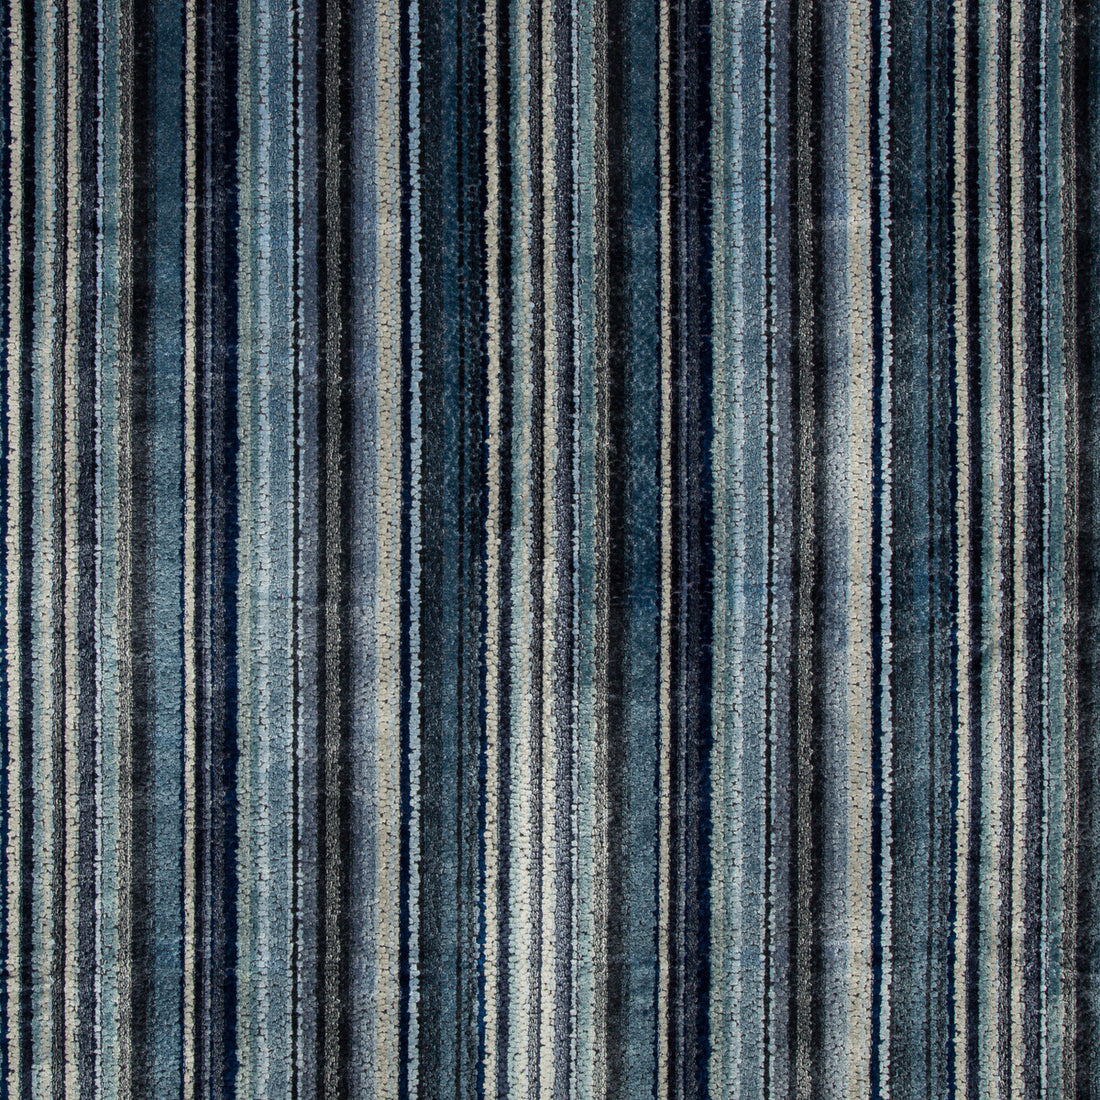 Monterosso fabric in indigo color - pattern 35767.5.0 - by Kravet Couture in the Modern Colors-Sojourn Collection collection